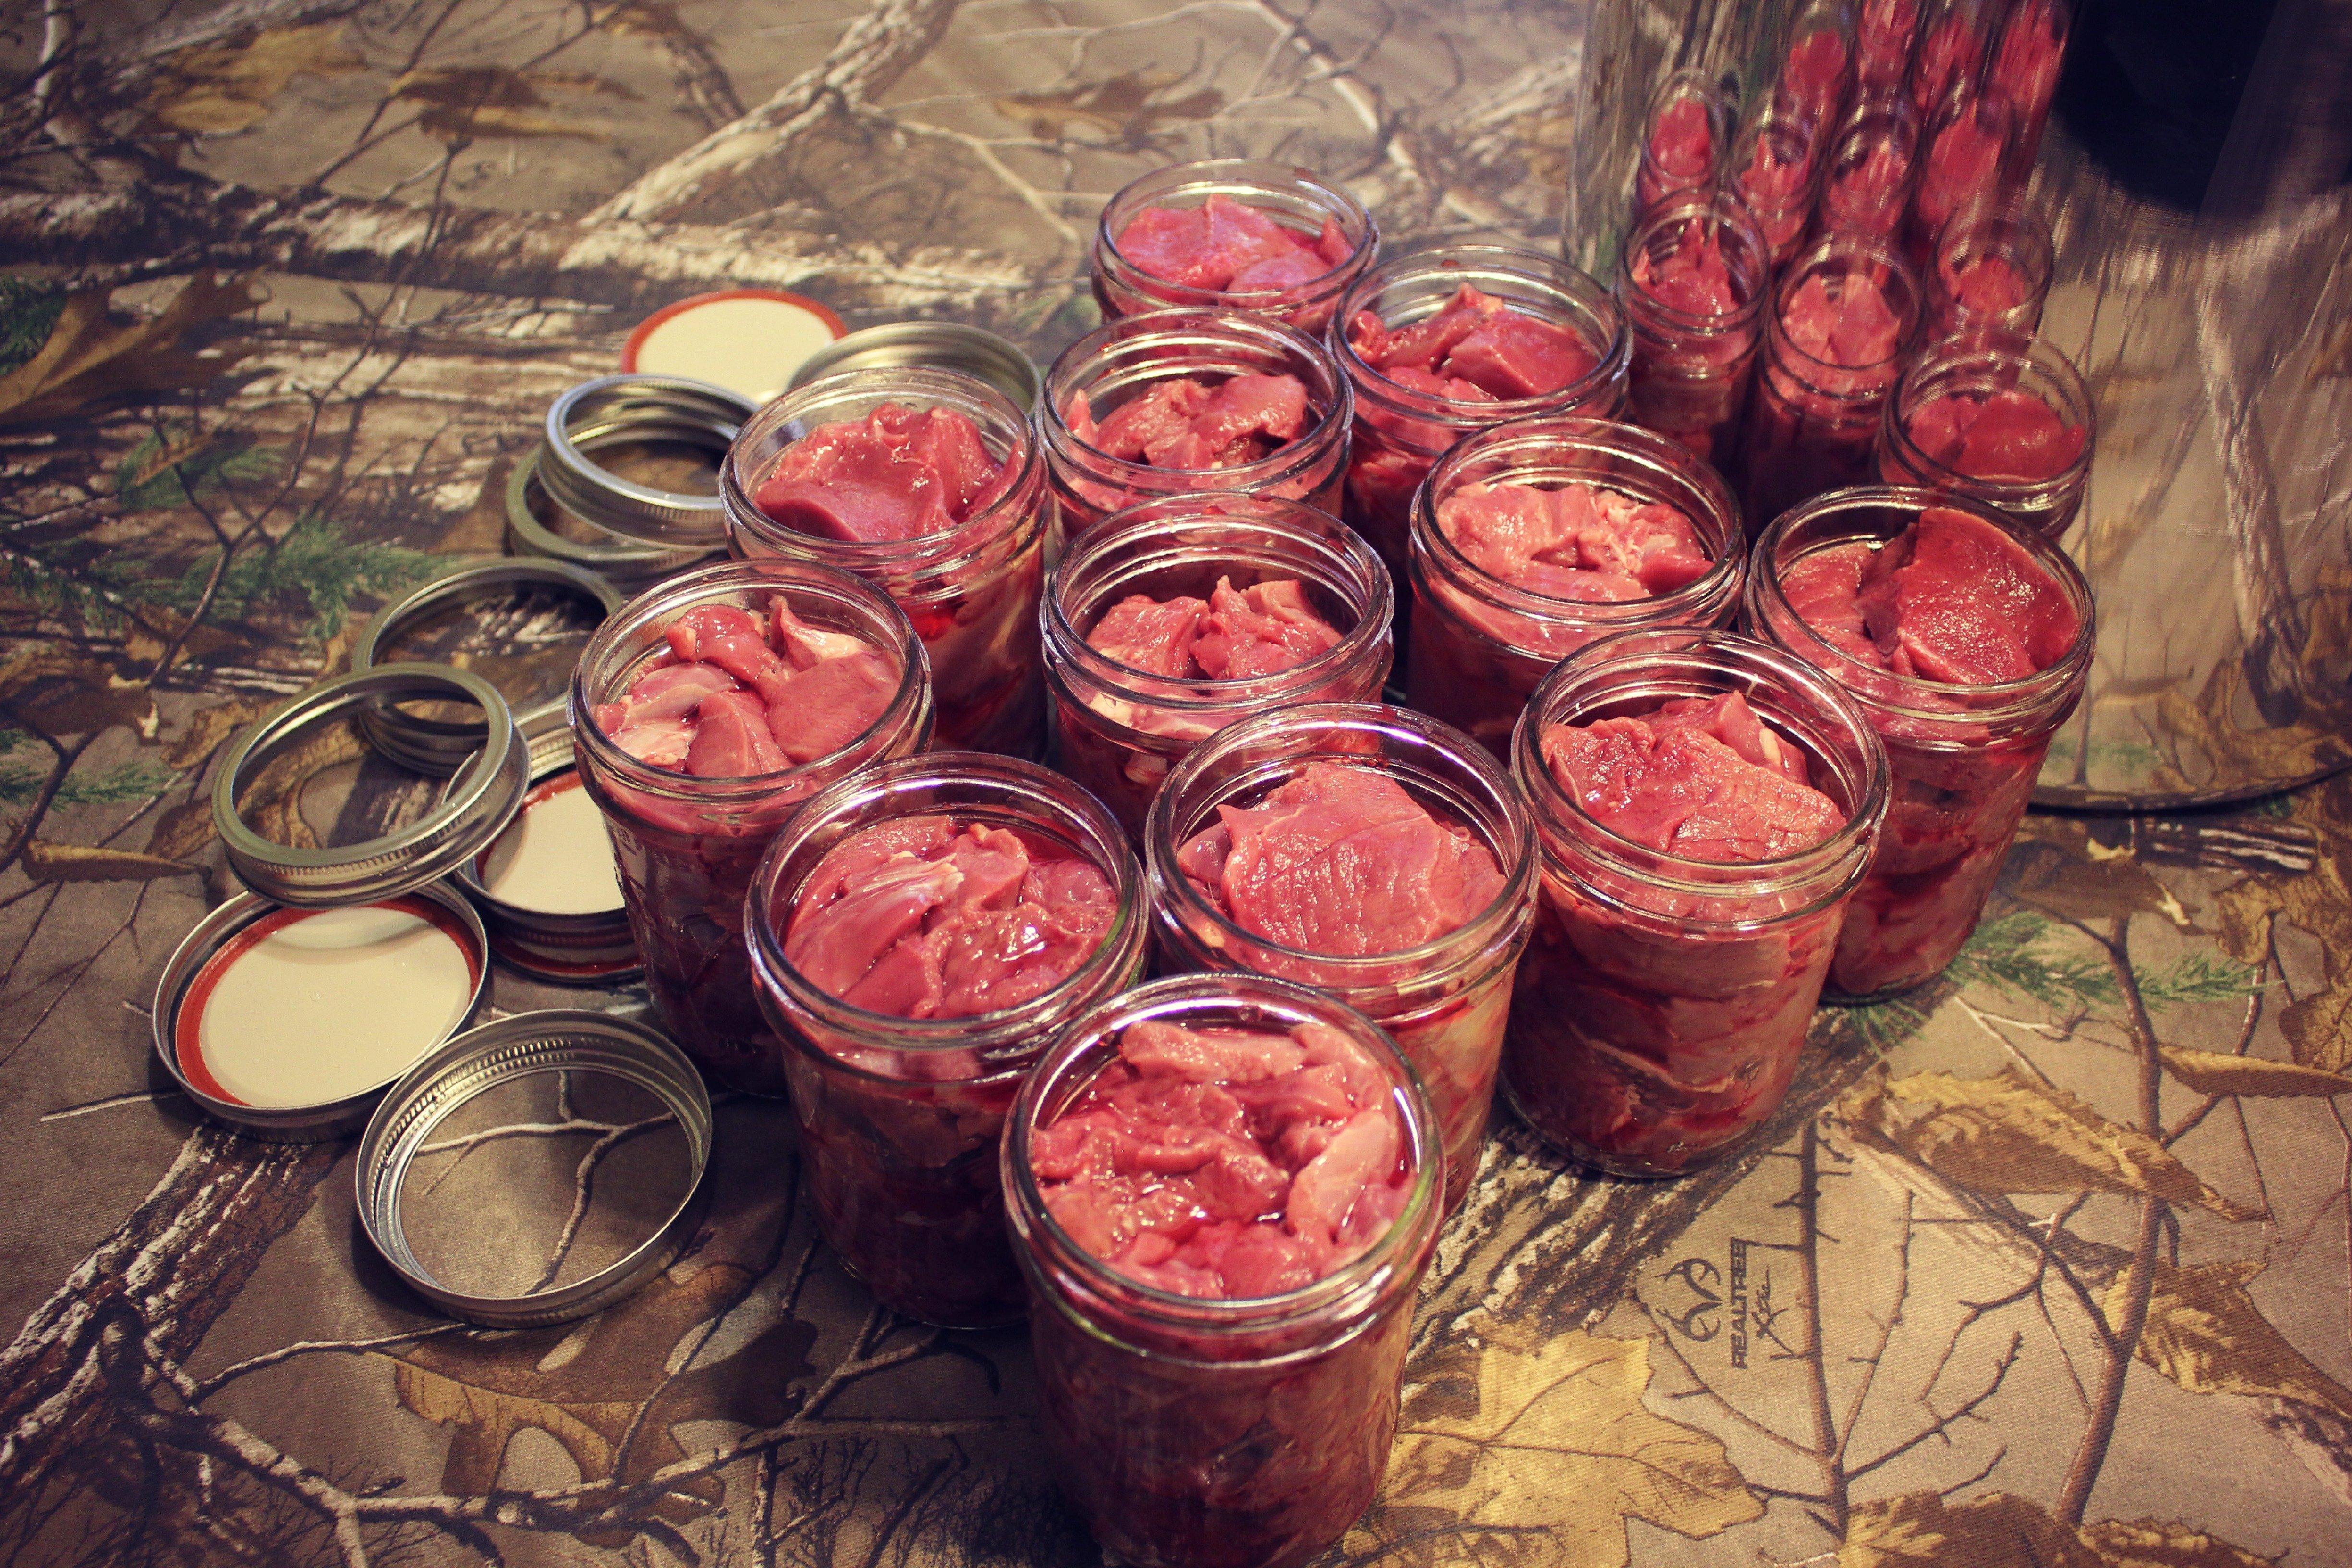 Pack jars tightly with trimmed venison, making sure to remove any air pockets.